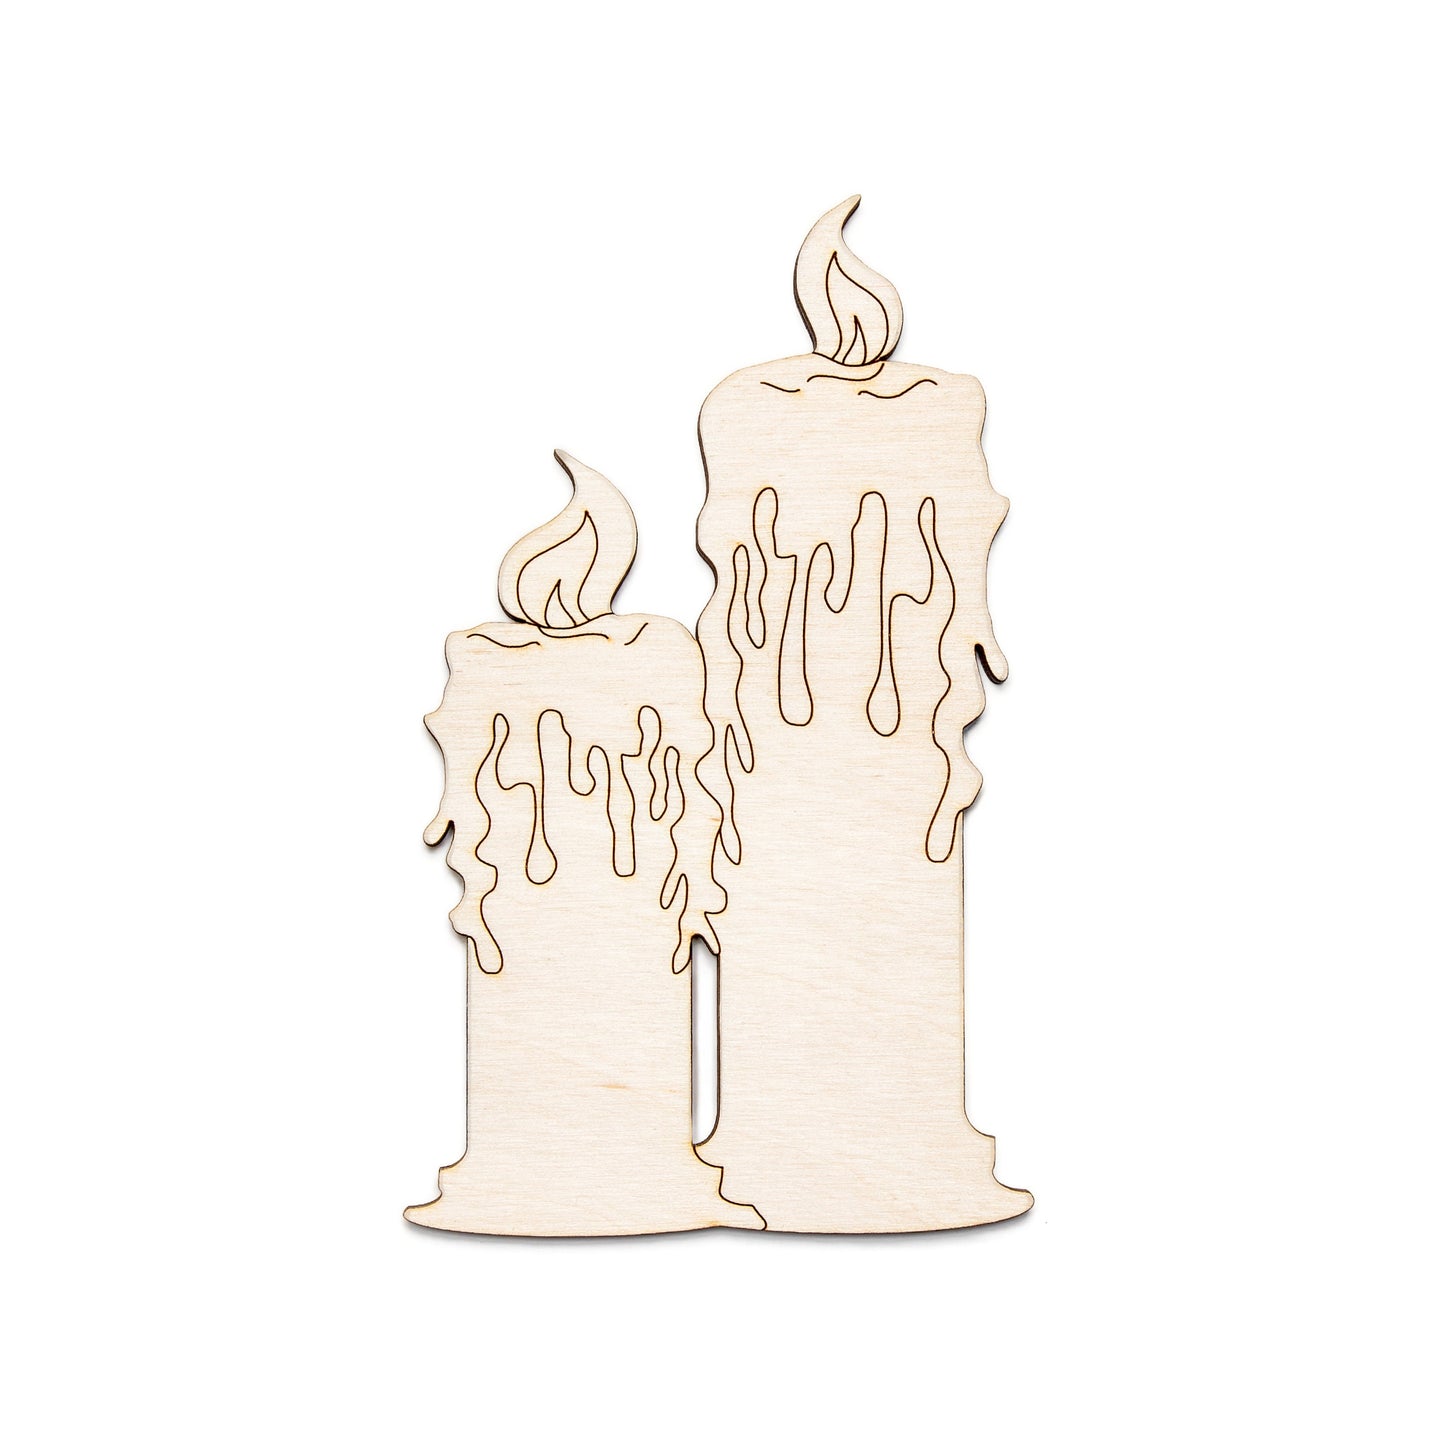 Lit Candle-Double-Wood Cutout-Candle Decor Props-Various Sizes-Halloween Decor-DIY Crafts-Gothic Decor-Haunted House Accessories-Spooky